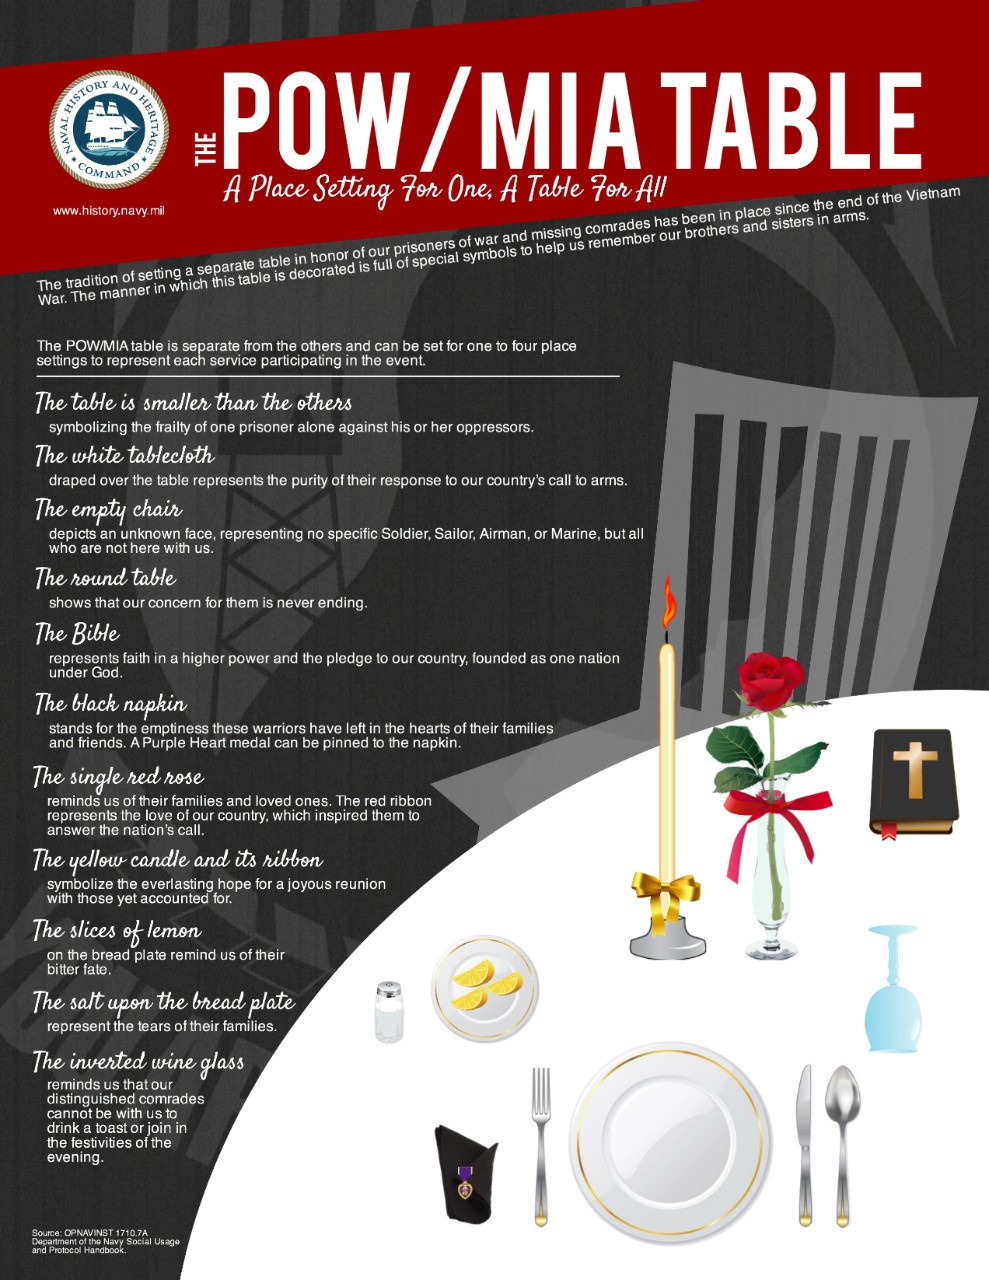 The POW/MIA Table: A place setting for one, A table for all